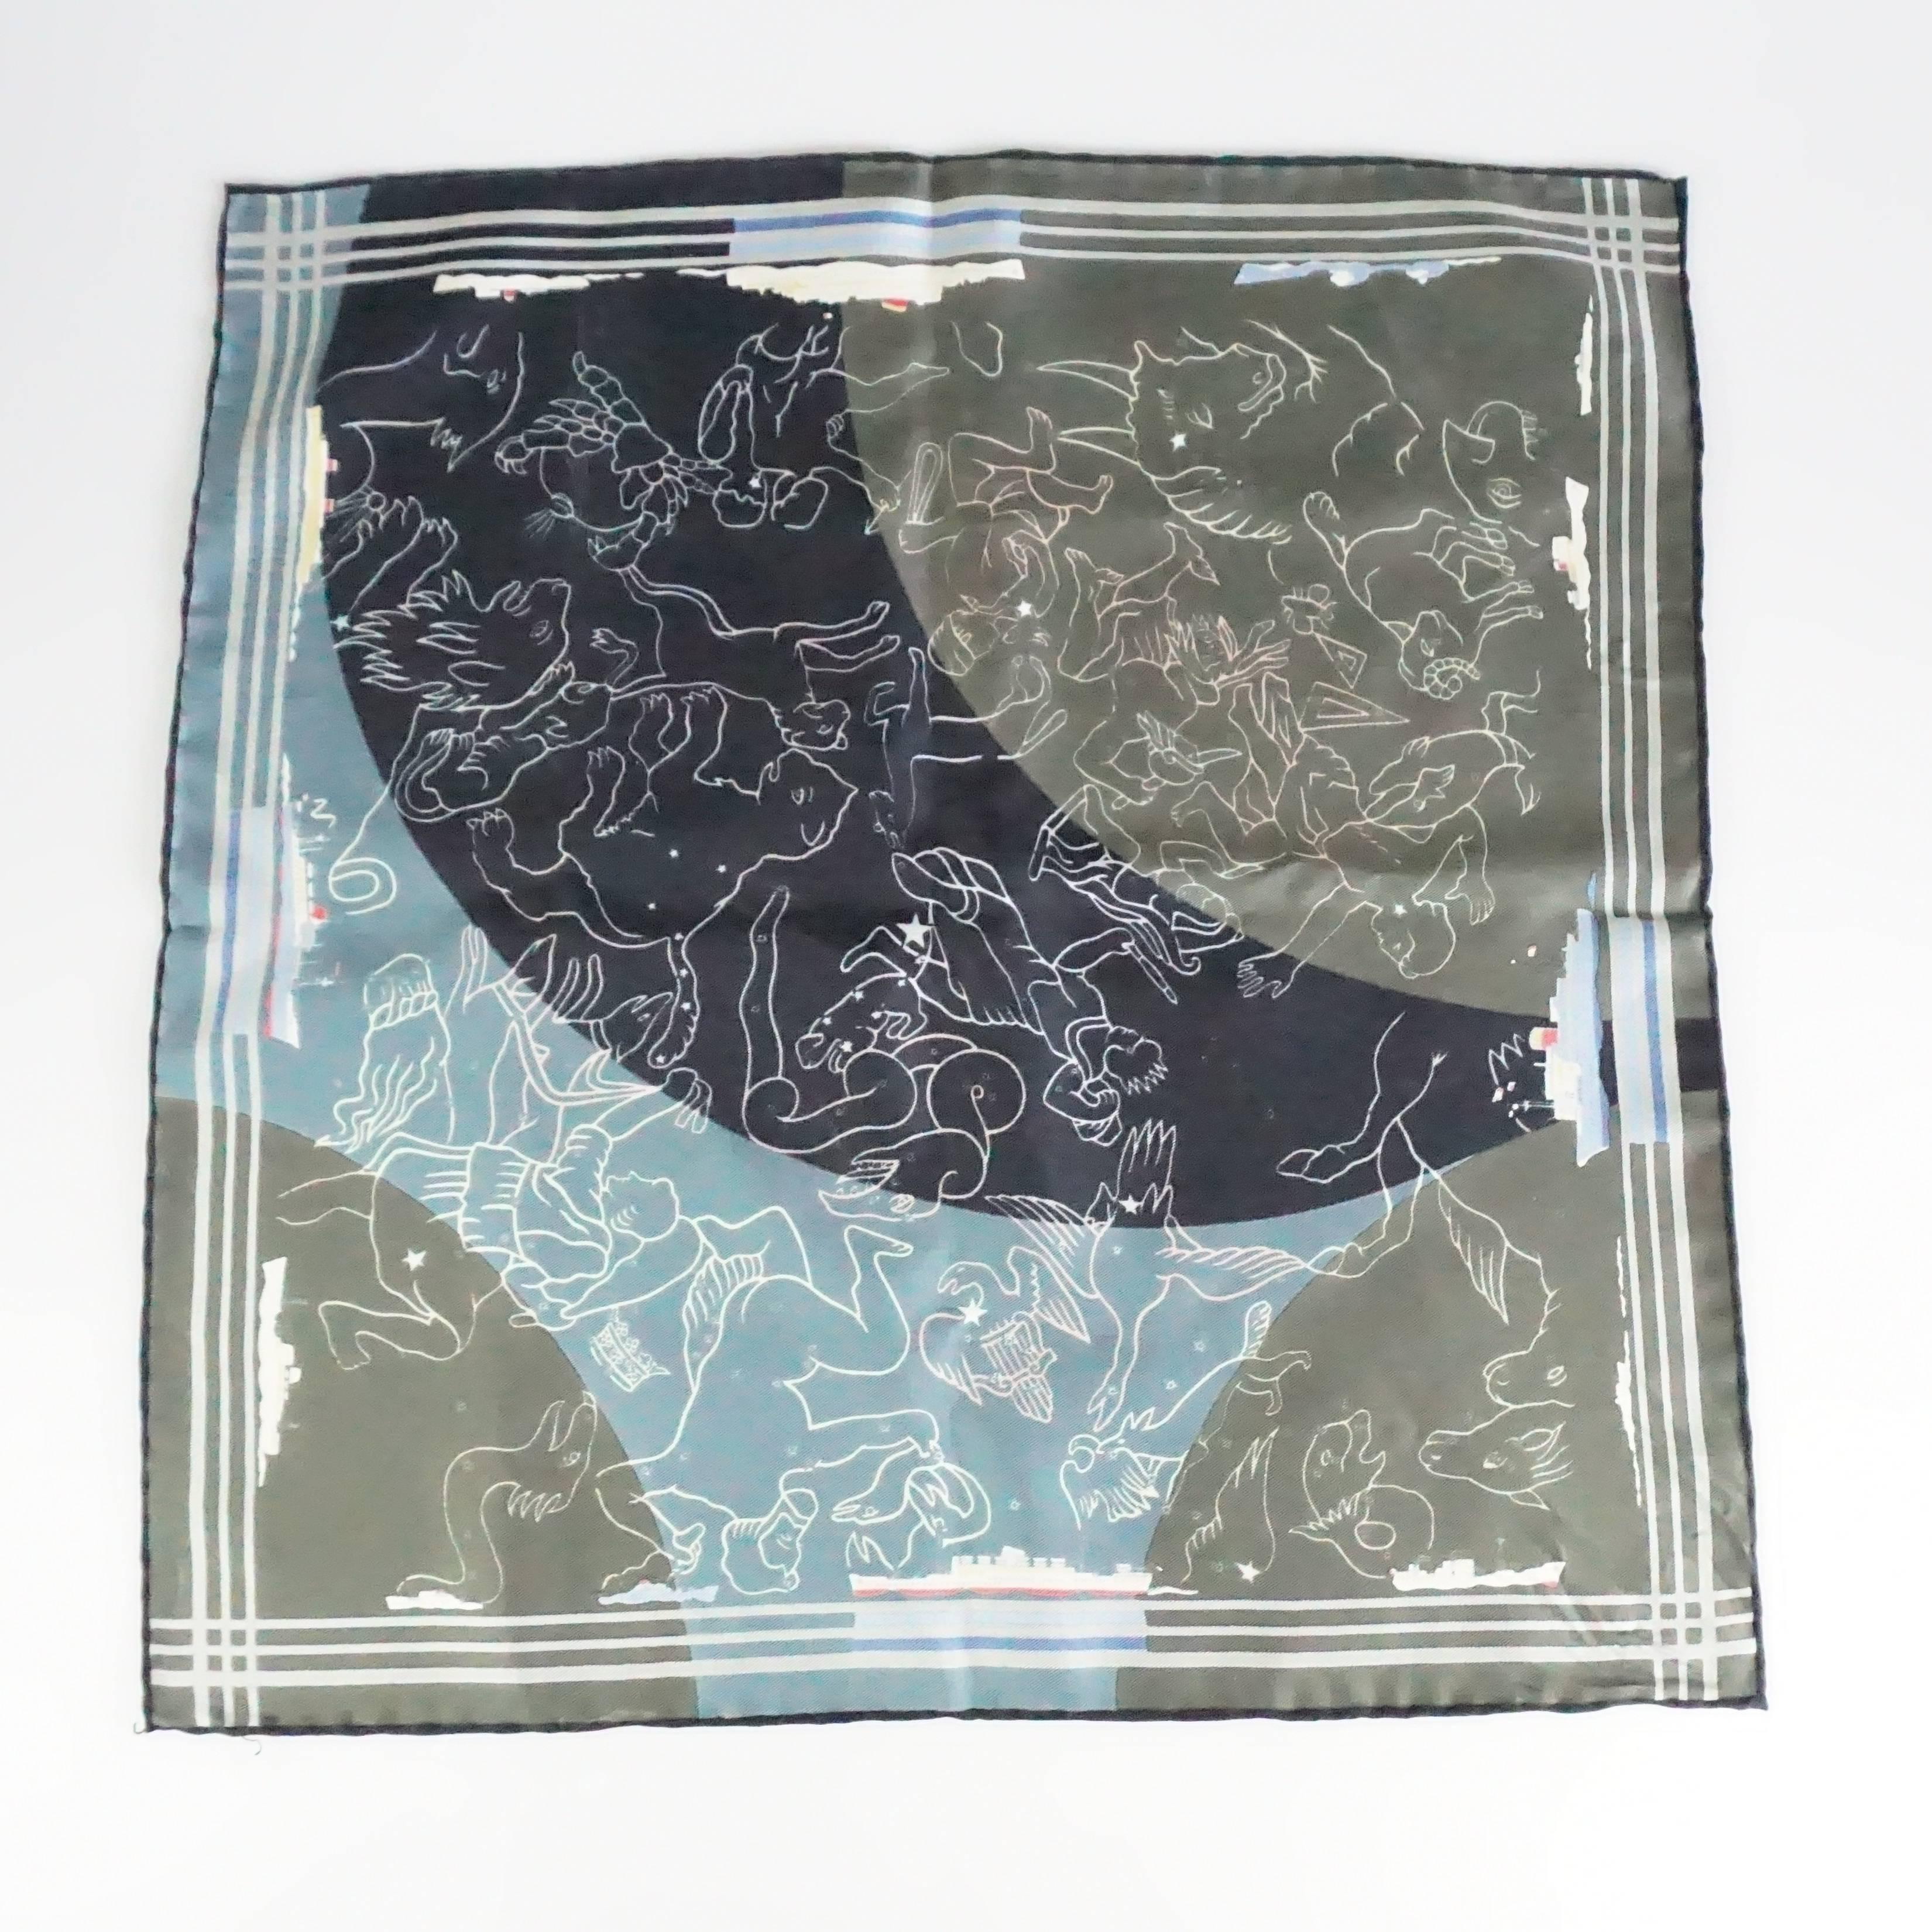 This silk Hermes pocket square has blue and white ships around the border, a yellow, orange, and pink astronomy / constellation design, and a striped border. This pocket square is in excellent condition.

Measurements
Height: 16.5”
Width: 16.5”
